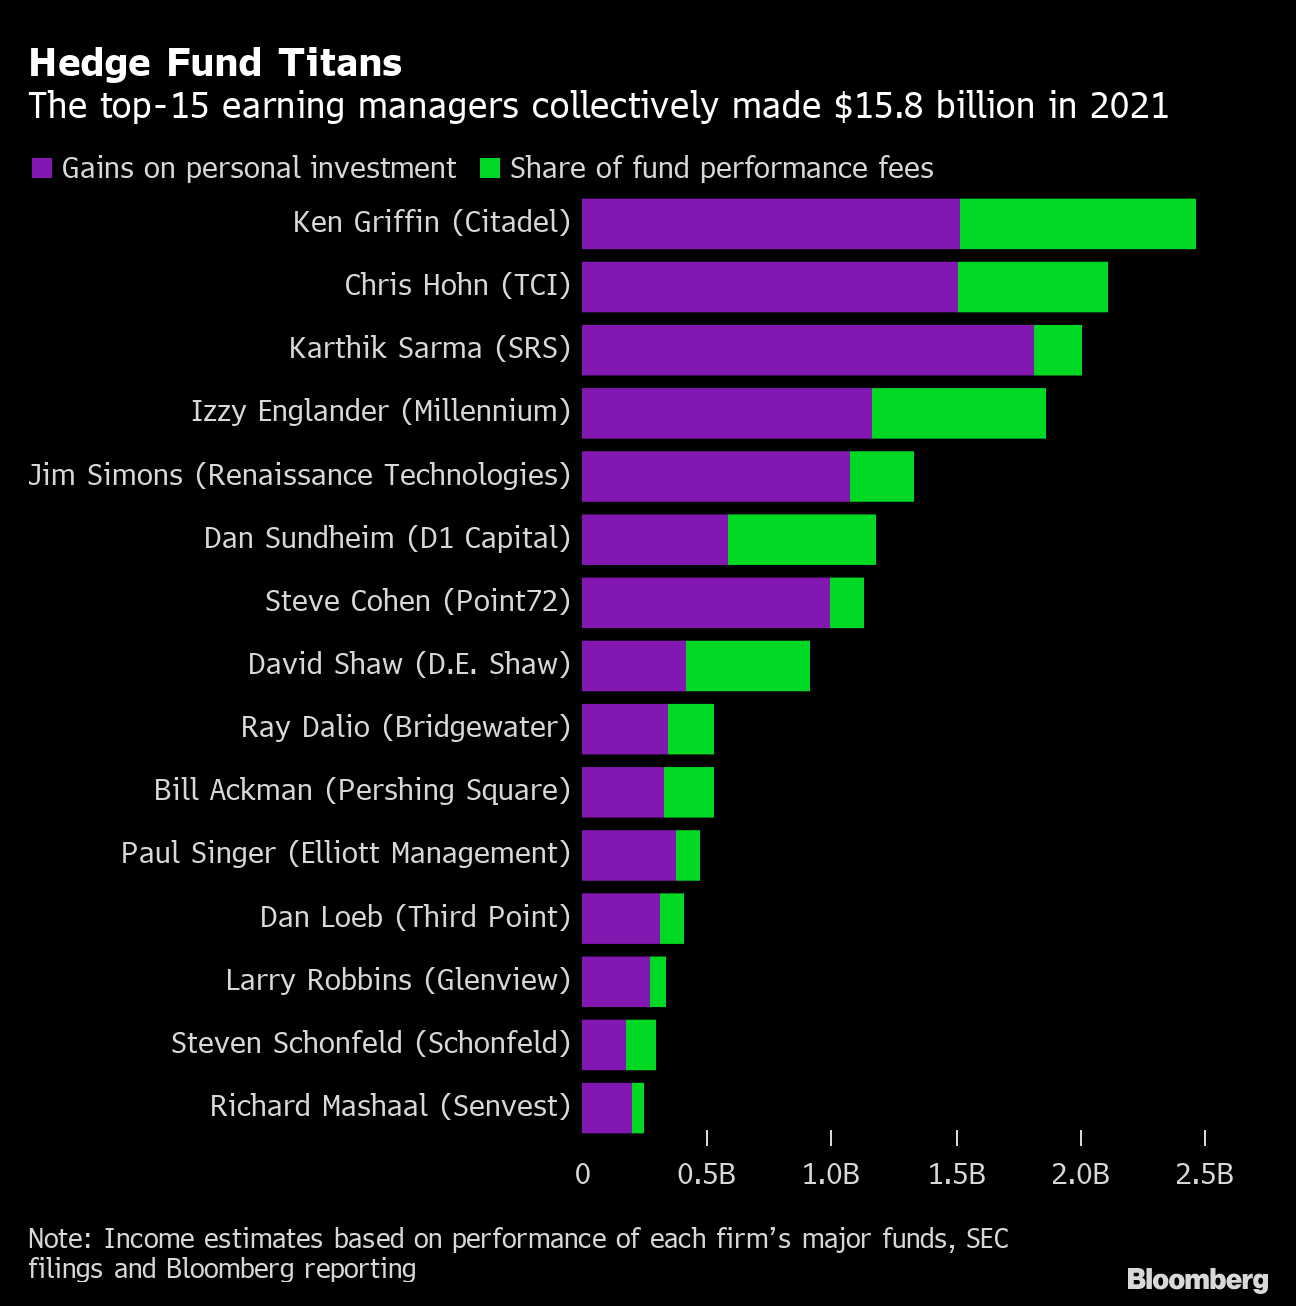 Hedge Fund Performance 20 20 Top Managers Made $20.20 Billion ...